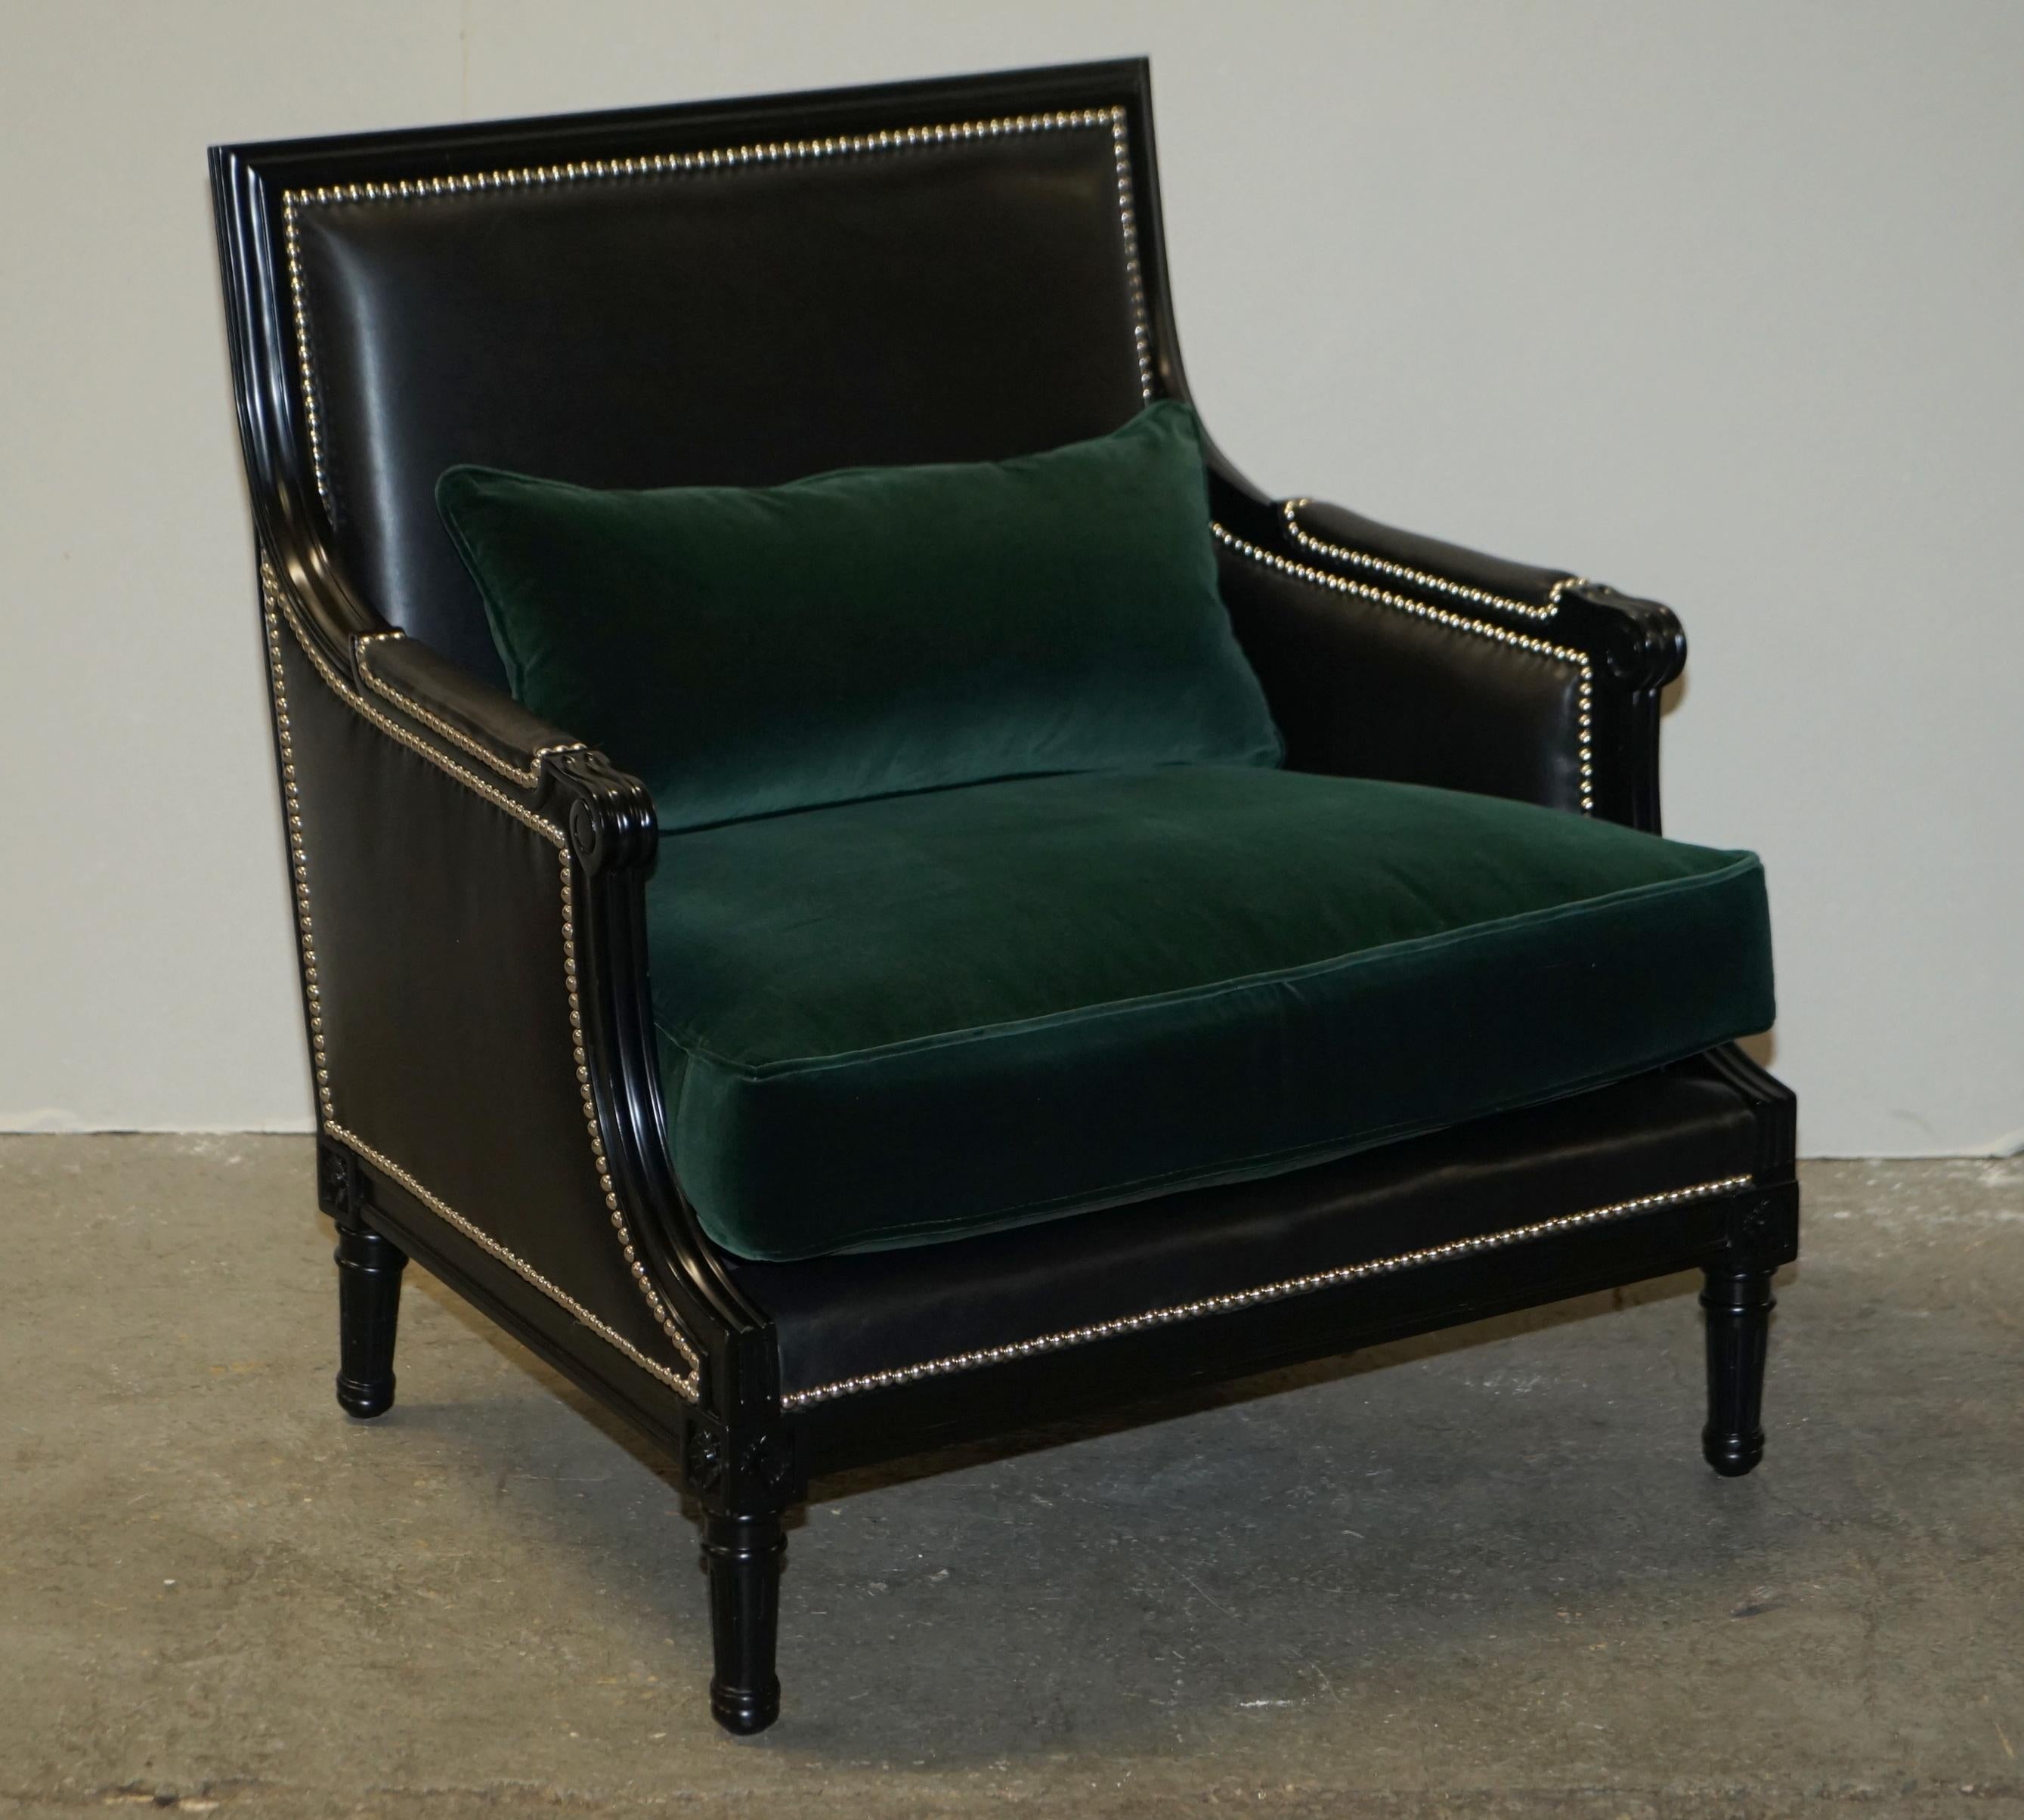 Royal House Antiques

Royal House Antiques is delighted to offer for sale this exquisite pair of RRP £15,310 Ralph Lauren Duchess Salon armchairs in Black leather with American Mahogany frames and green velvet cushions

Please note the delivery fee